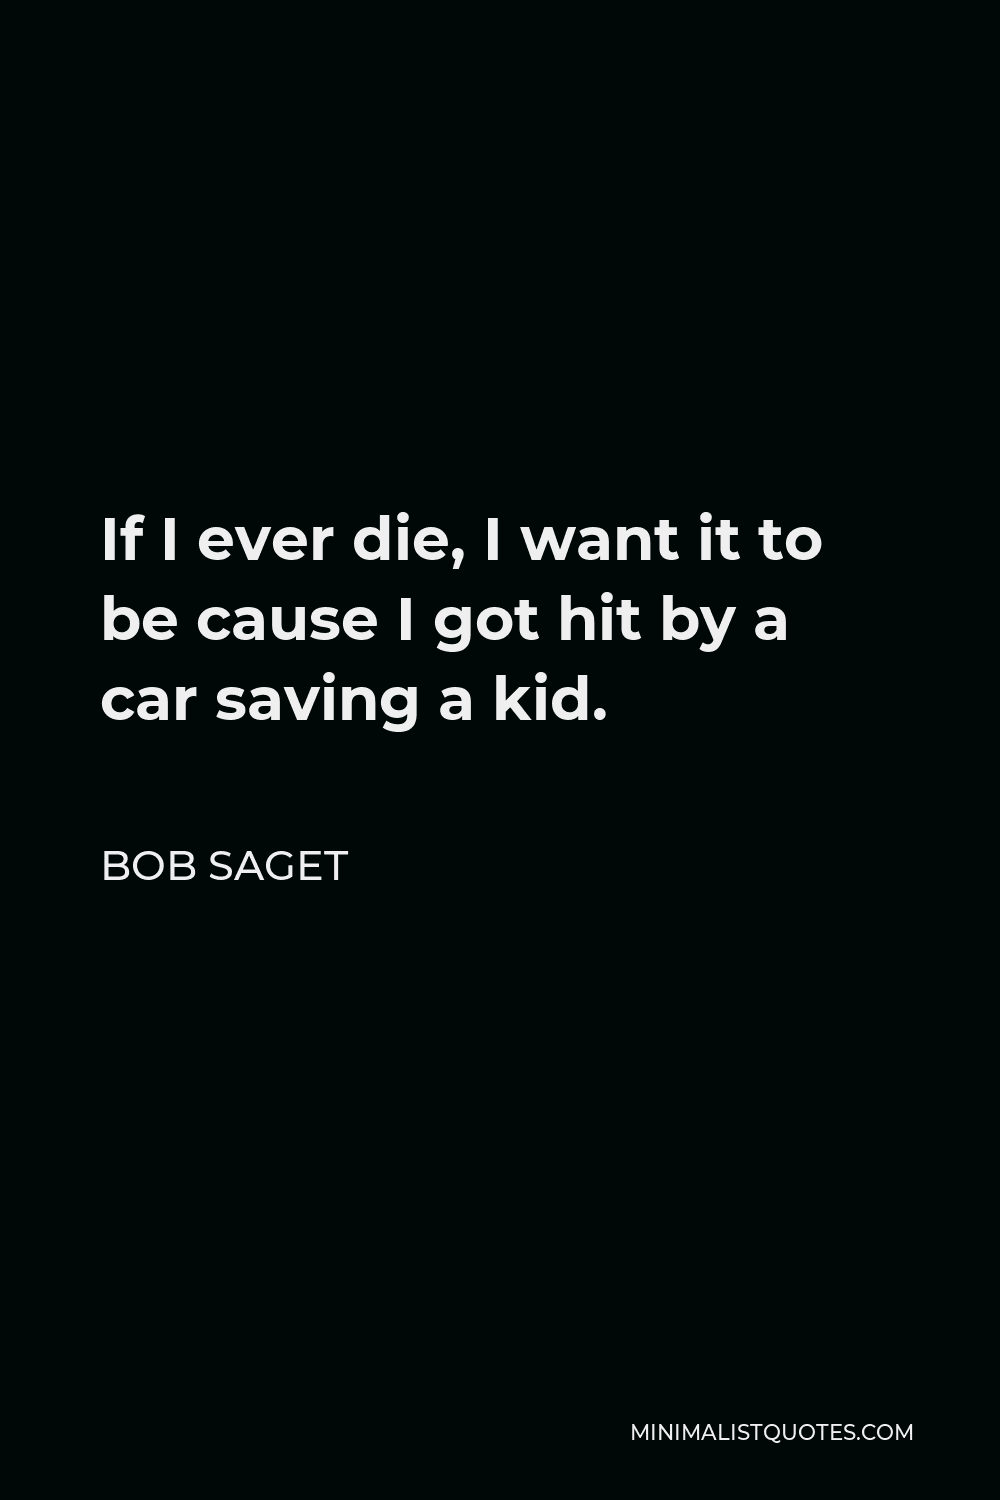 Bob Saget Quote - If I ever die, I want it to be cause I got hit by a car saving a kid.